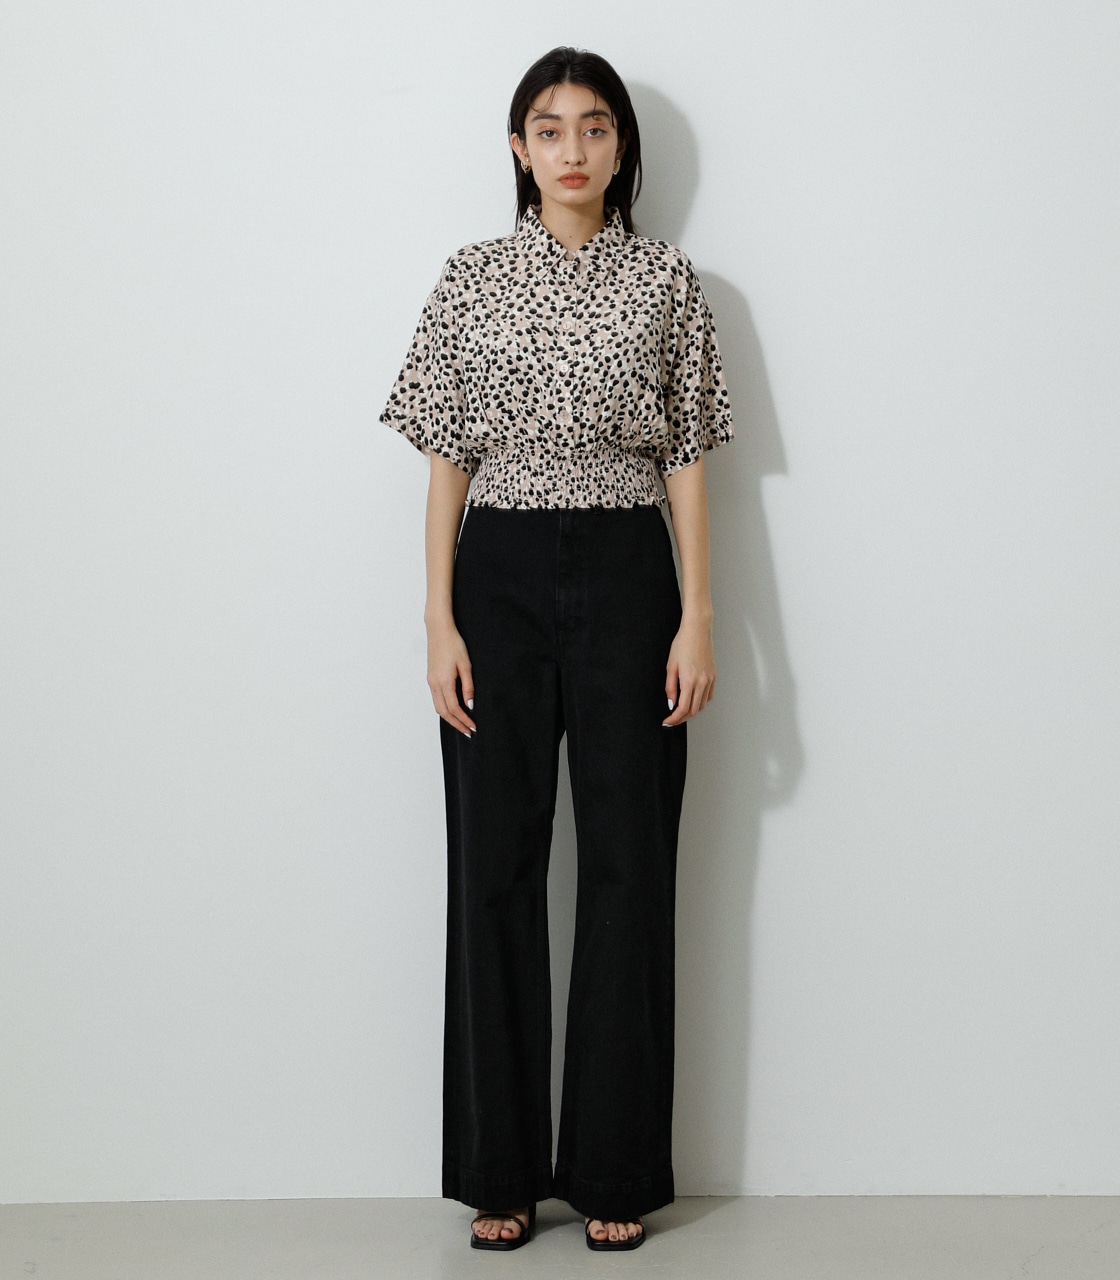 ECOVERO LEOPARD PRINT BLOUSE/エコヴェロレオパードプリントブラウス 詳細画像 柄BEG 4